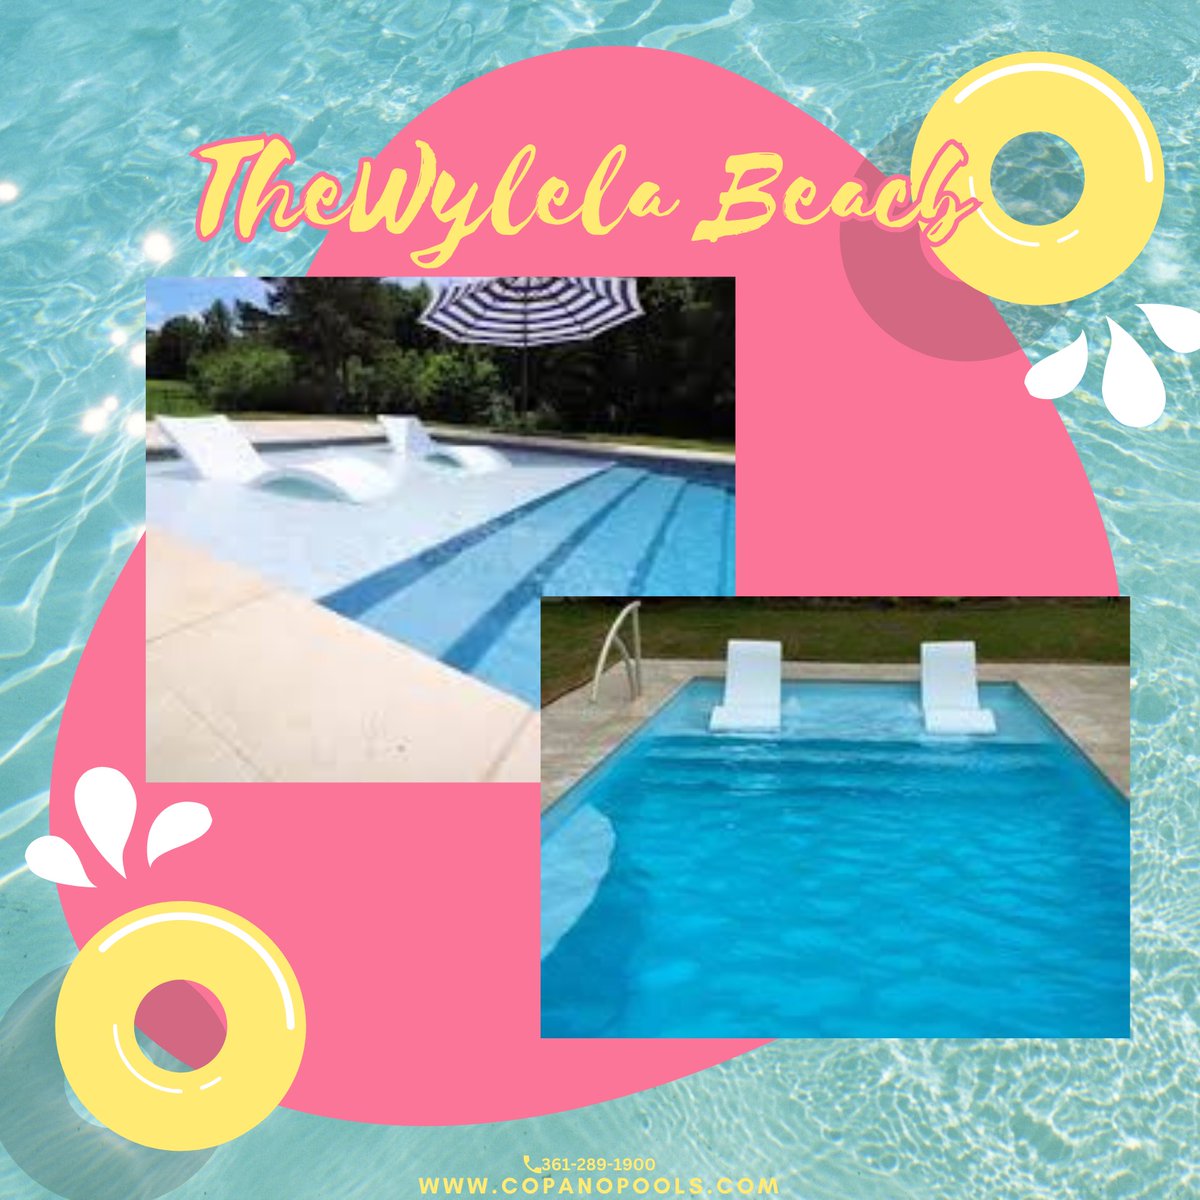 The Wylela is a ✨stunning✨ modern pool with endless customization possibilities from waterfalls to LED lighting. The Wylela has an initial depth of 3'6' descending to a depth of 6'.😎☀️

copanopools.com

#Pool #PoolCompany #CopanoPoolsandSpas